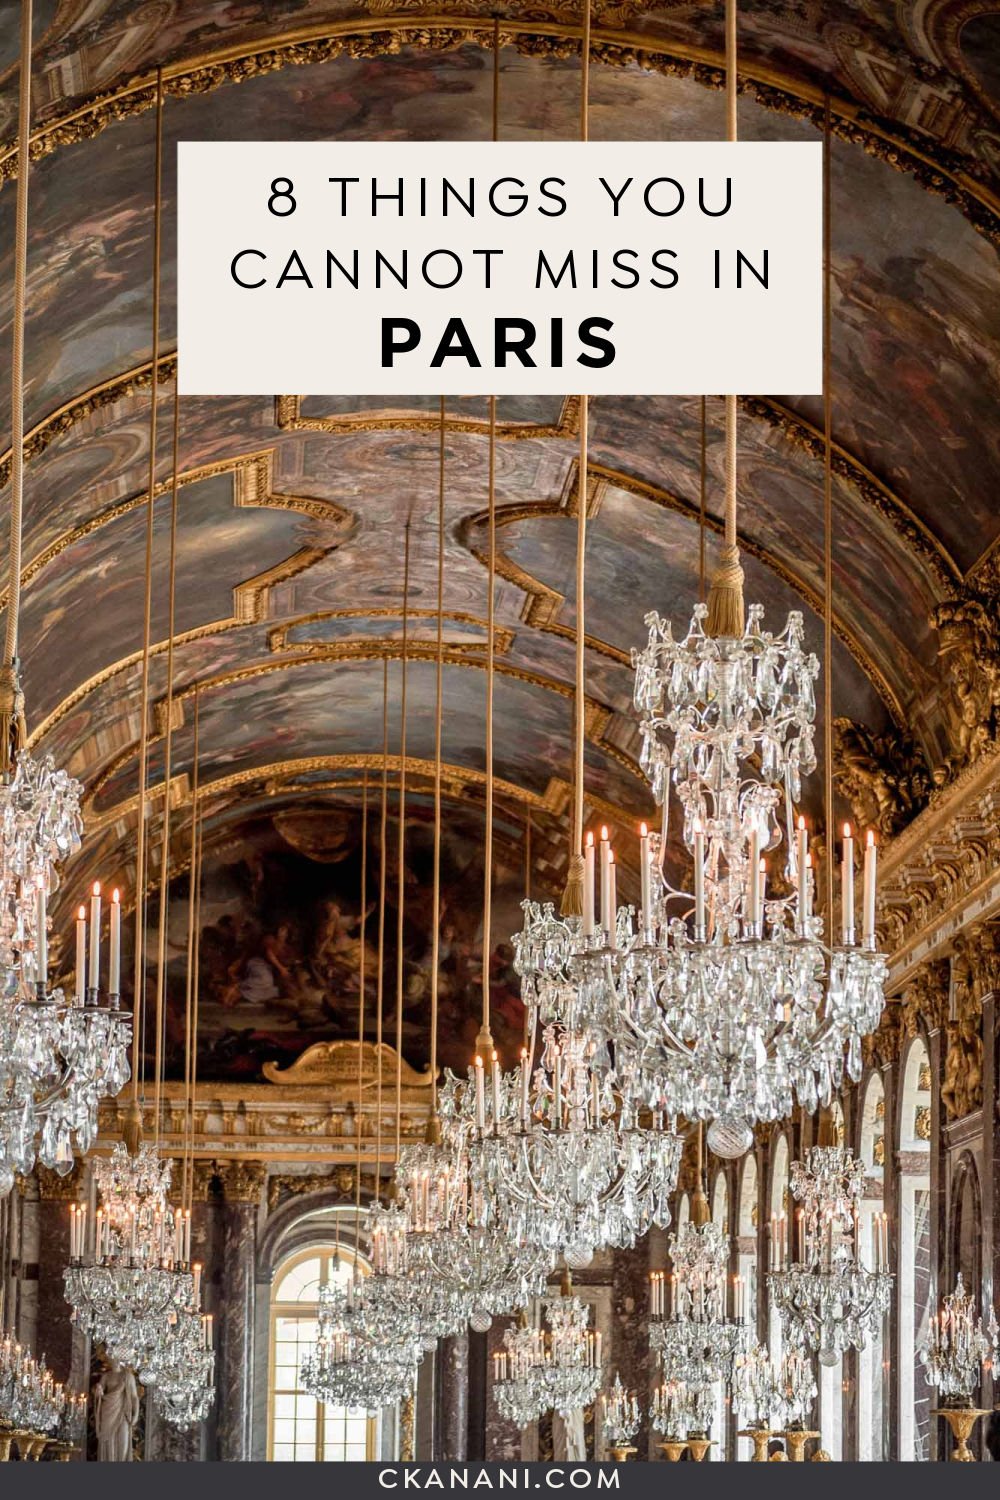 8 things you cannot miss in Paris! Paris tips / things to do in Paris / Paris holiday / Paris itinerary / Paris tips &amp; tricks / Paris France / 2 day Paris itinerary / what to do in Paris